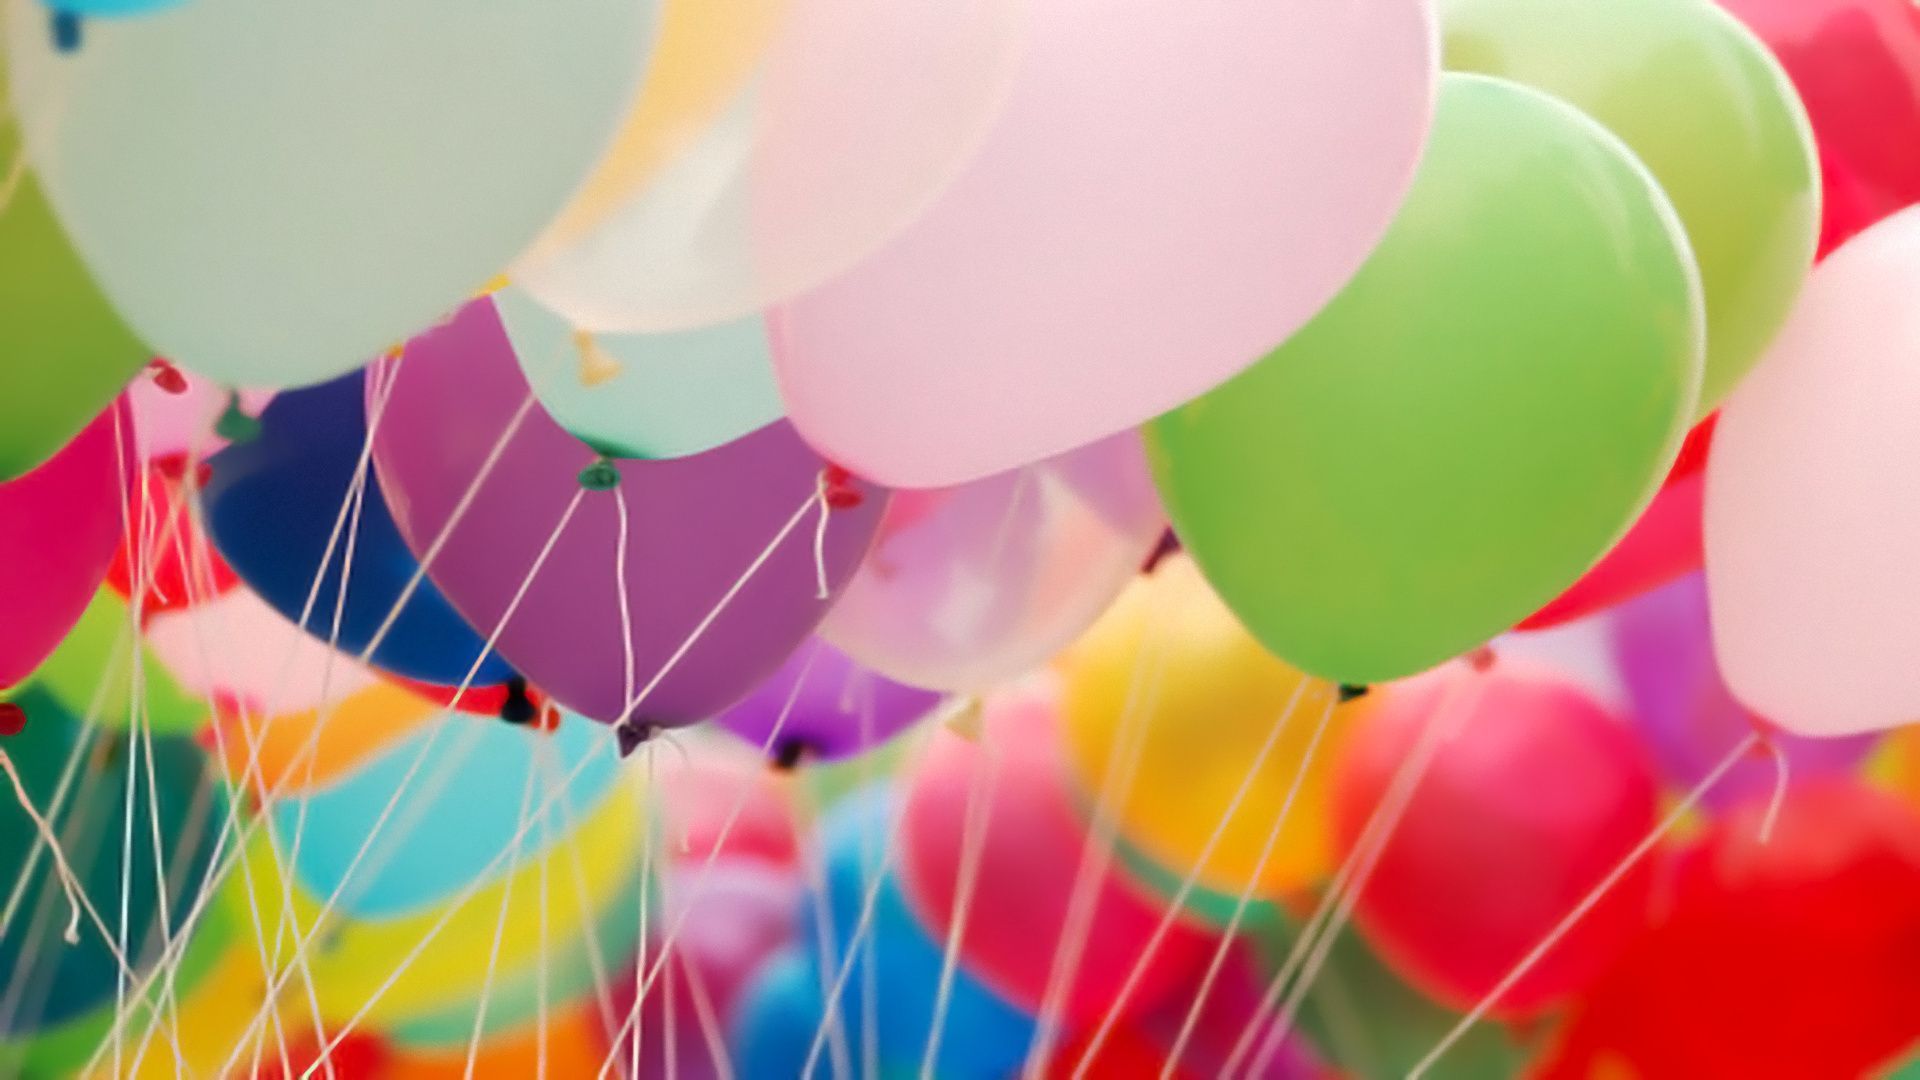 Colorful balloons on a string - Balloons